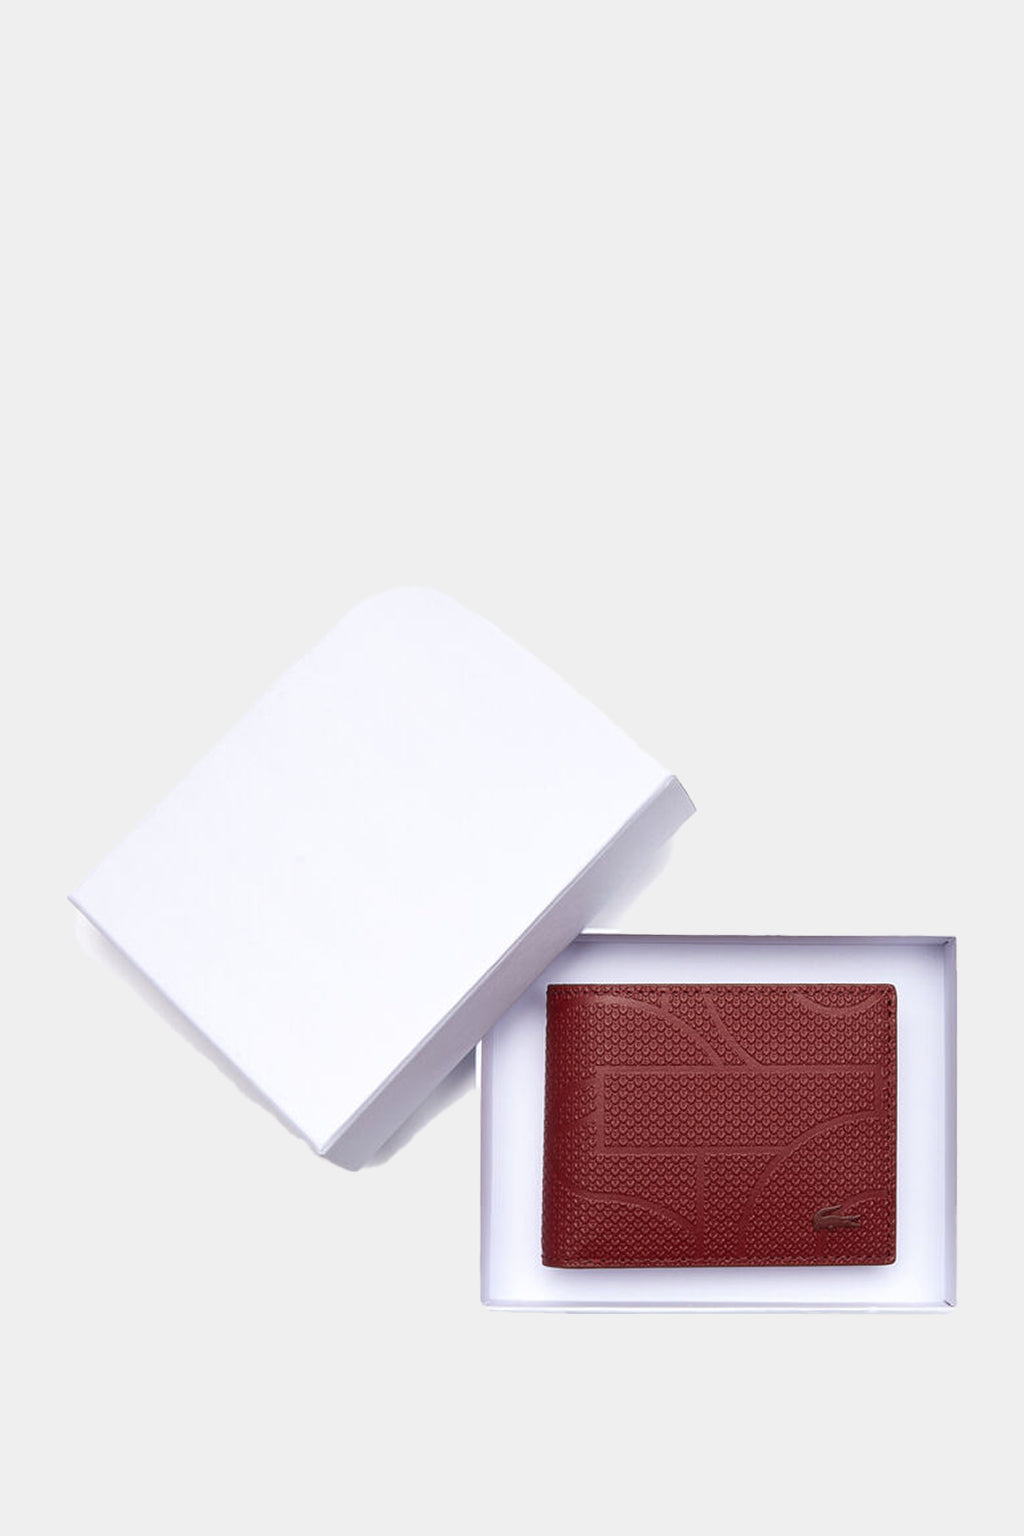 Lacoste - Chantaco Small Graphic Piqué Leather Wallet